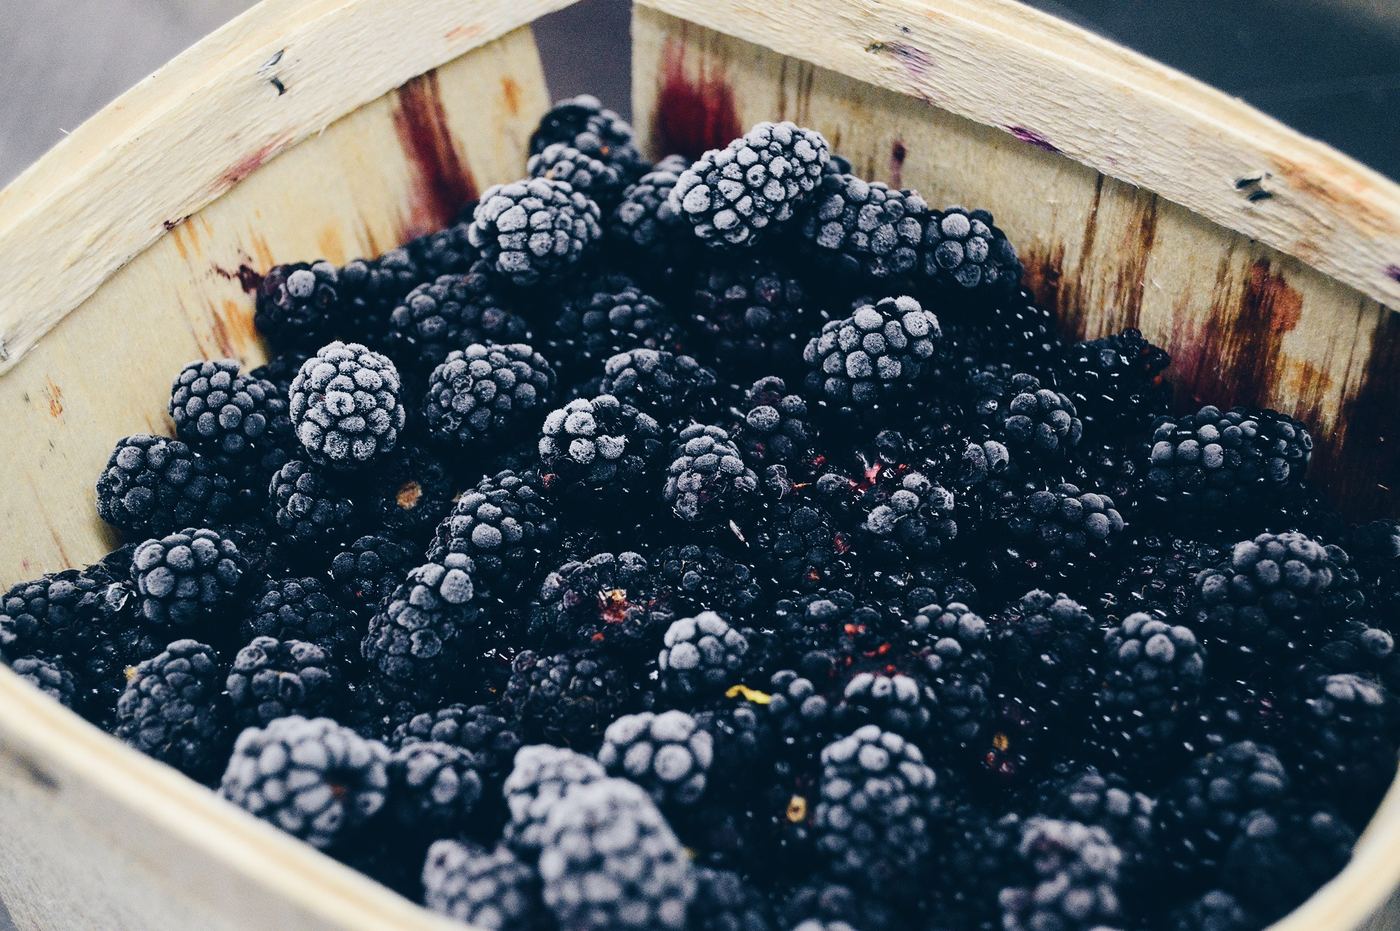 Blackberries in a basket illustrating some of the flavours in Cabernet Sauvignon